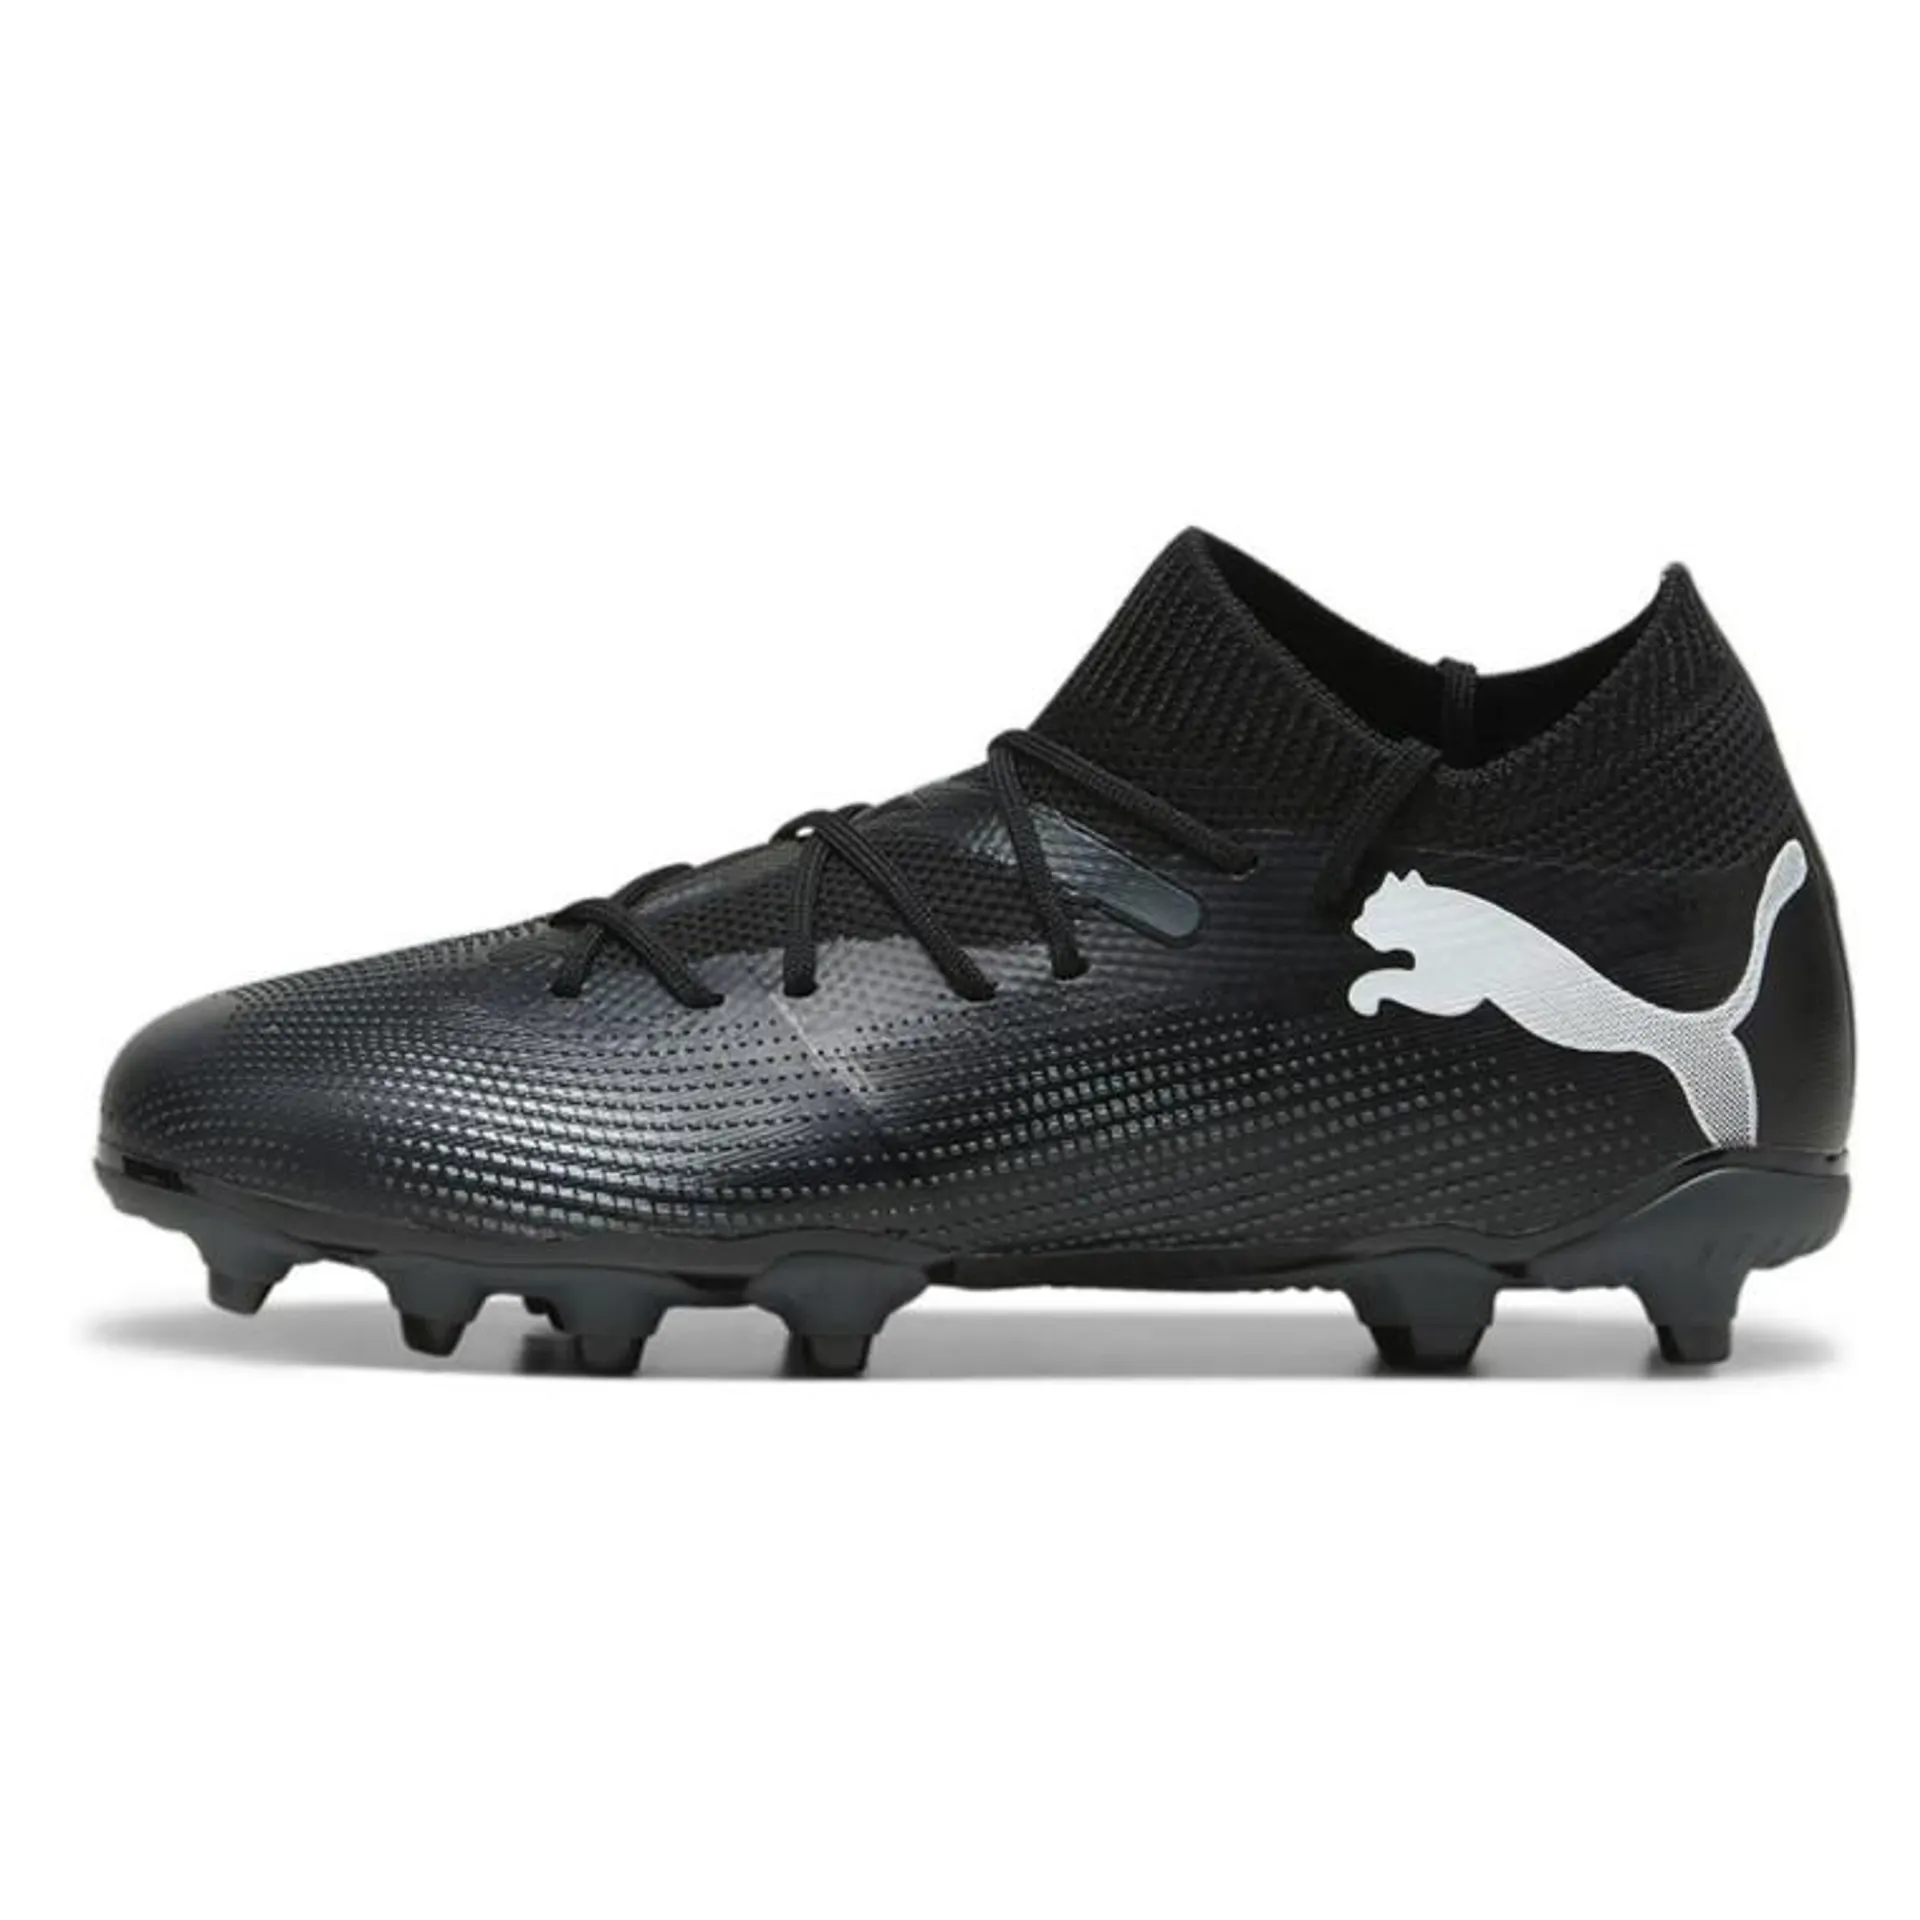 Puma Youth Future 7 Match Firm Ground Boots Black/White